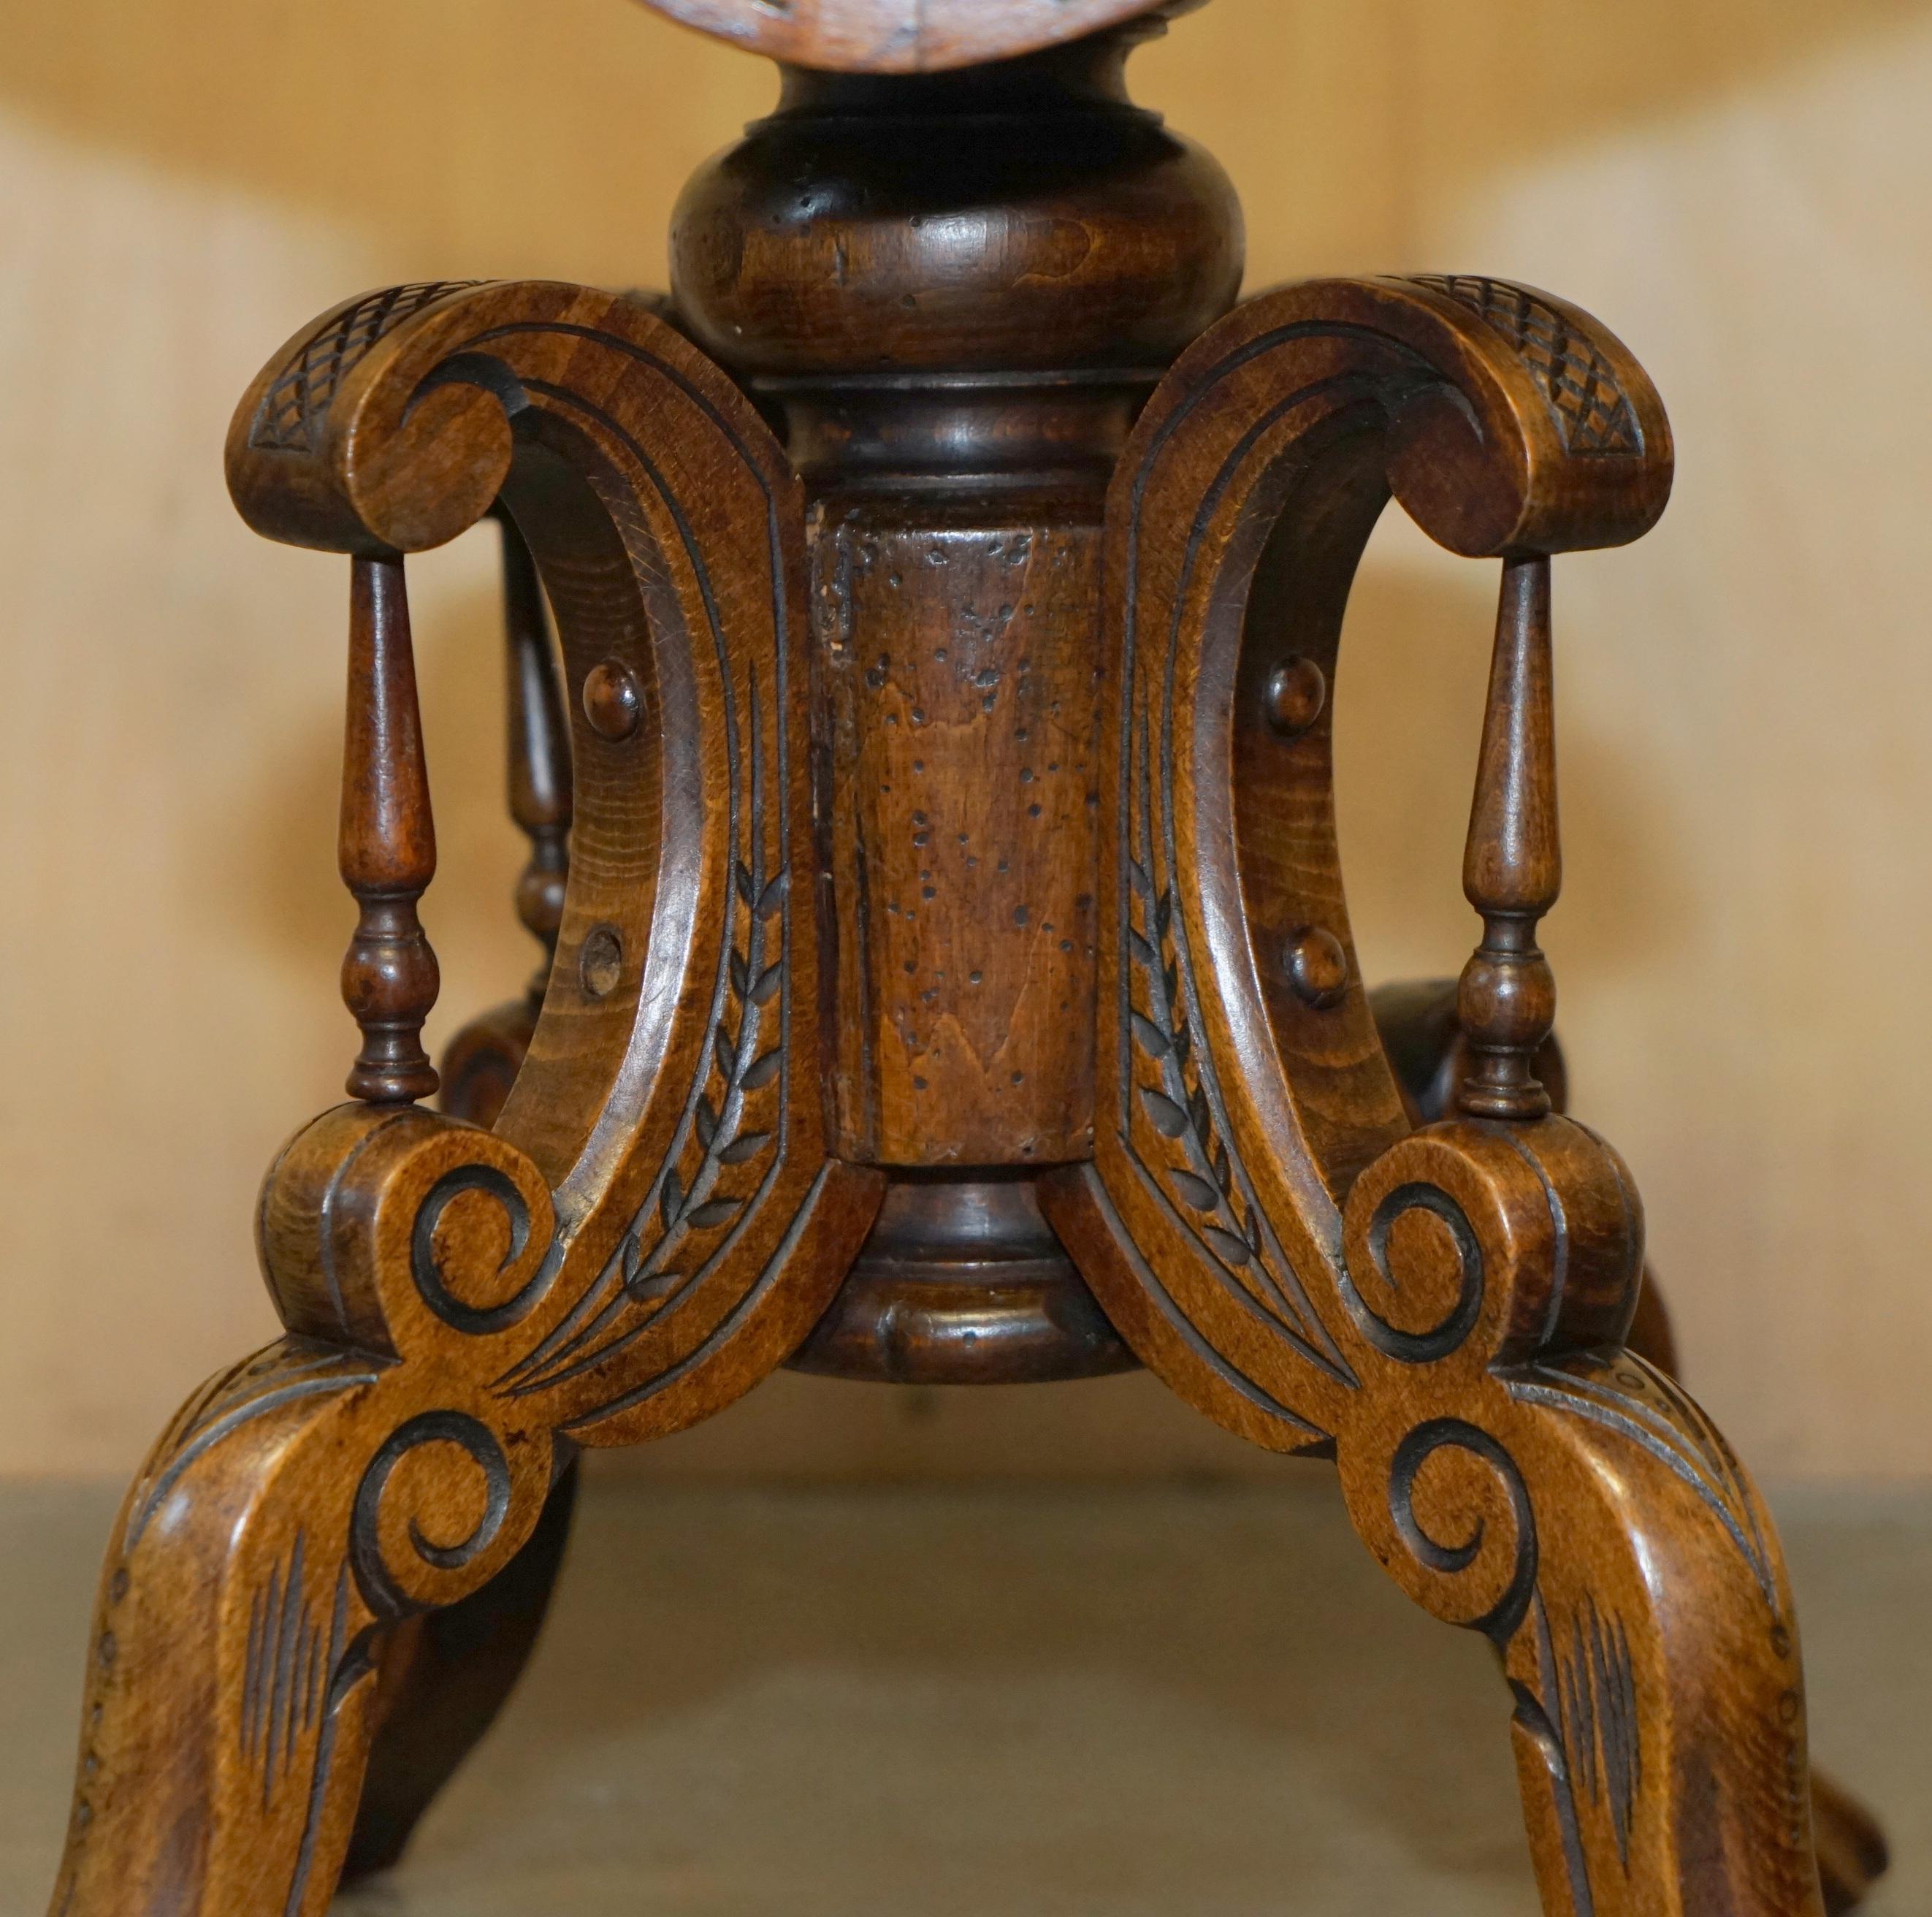 ANTIQUE ViCTORIAN WALNUT MUSIC DRESSING TABLE STOOL DECORATIVE BASE CURVED SEAT For Sale 1